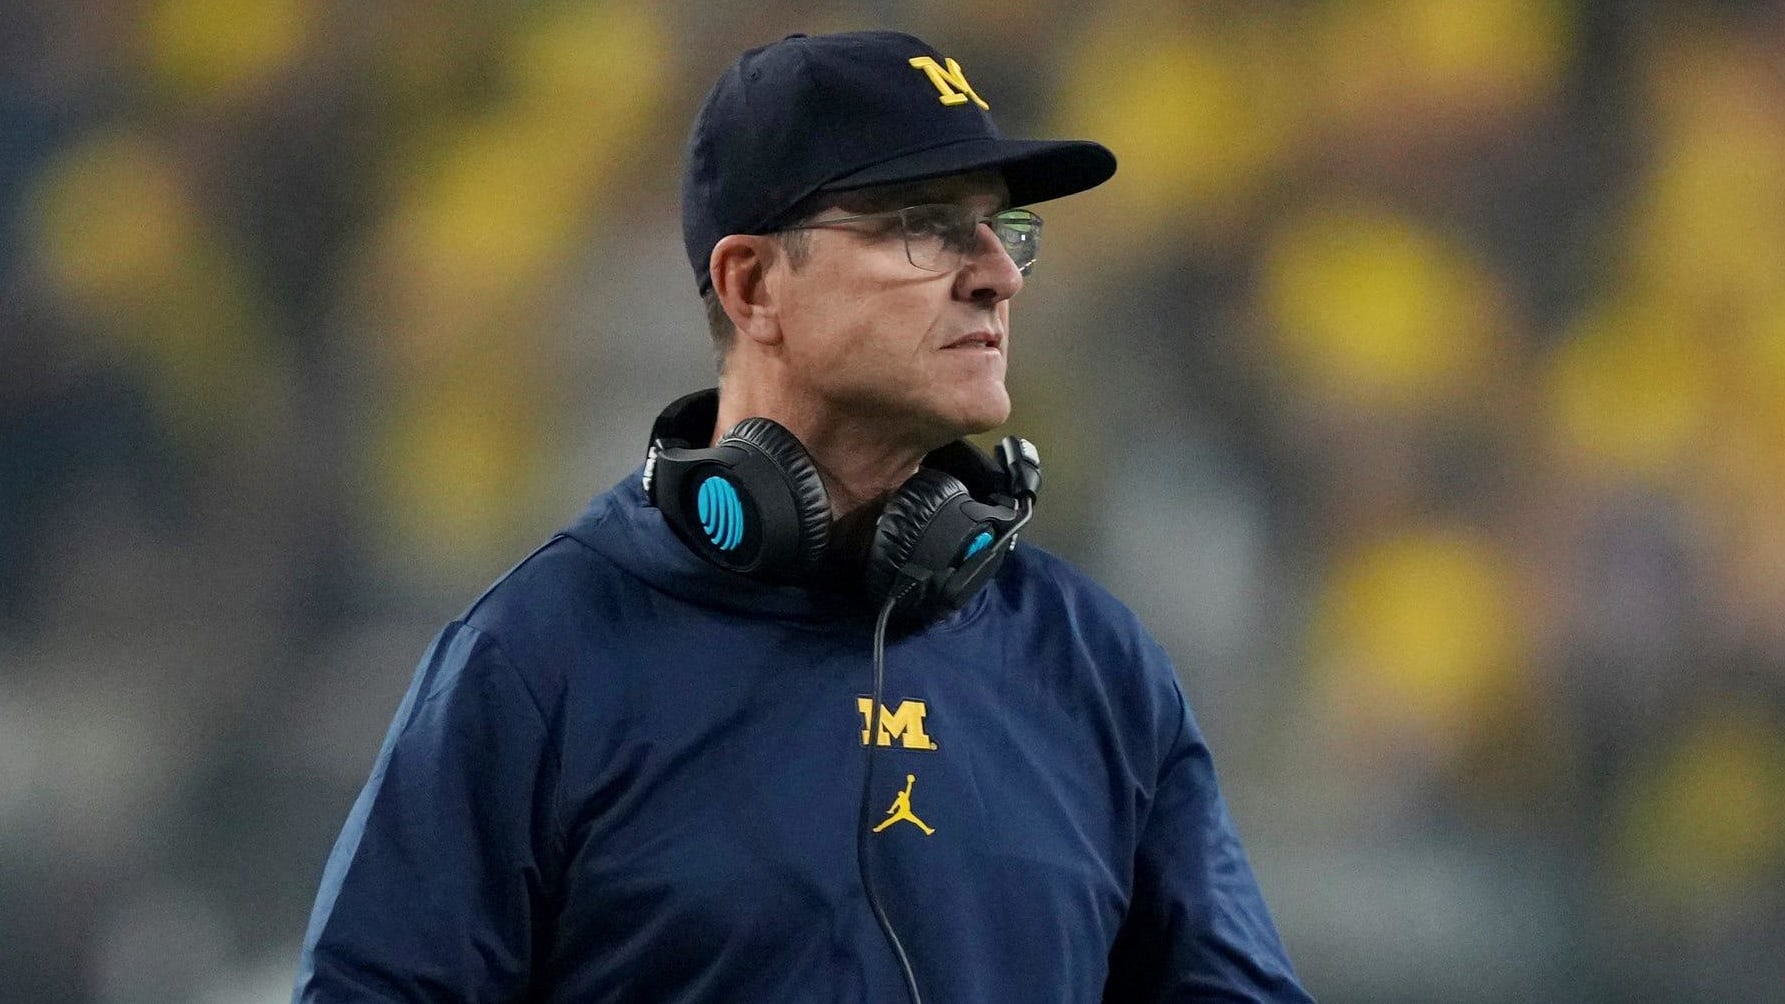 Ex-Michigan Wolverines head coach Jim Harbaugh on the sideline during a college football game in the Big Ten.